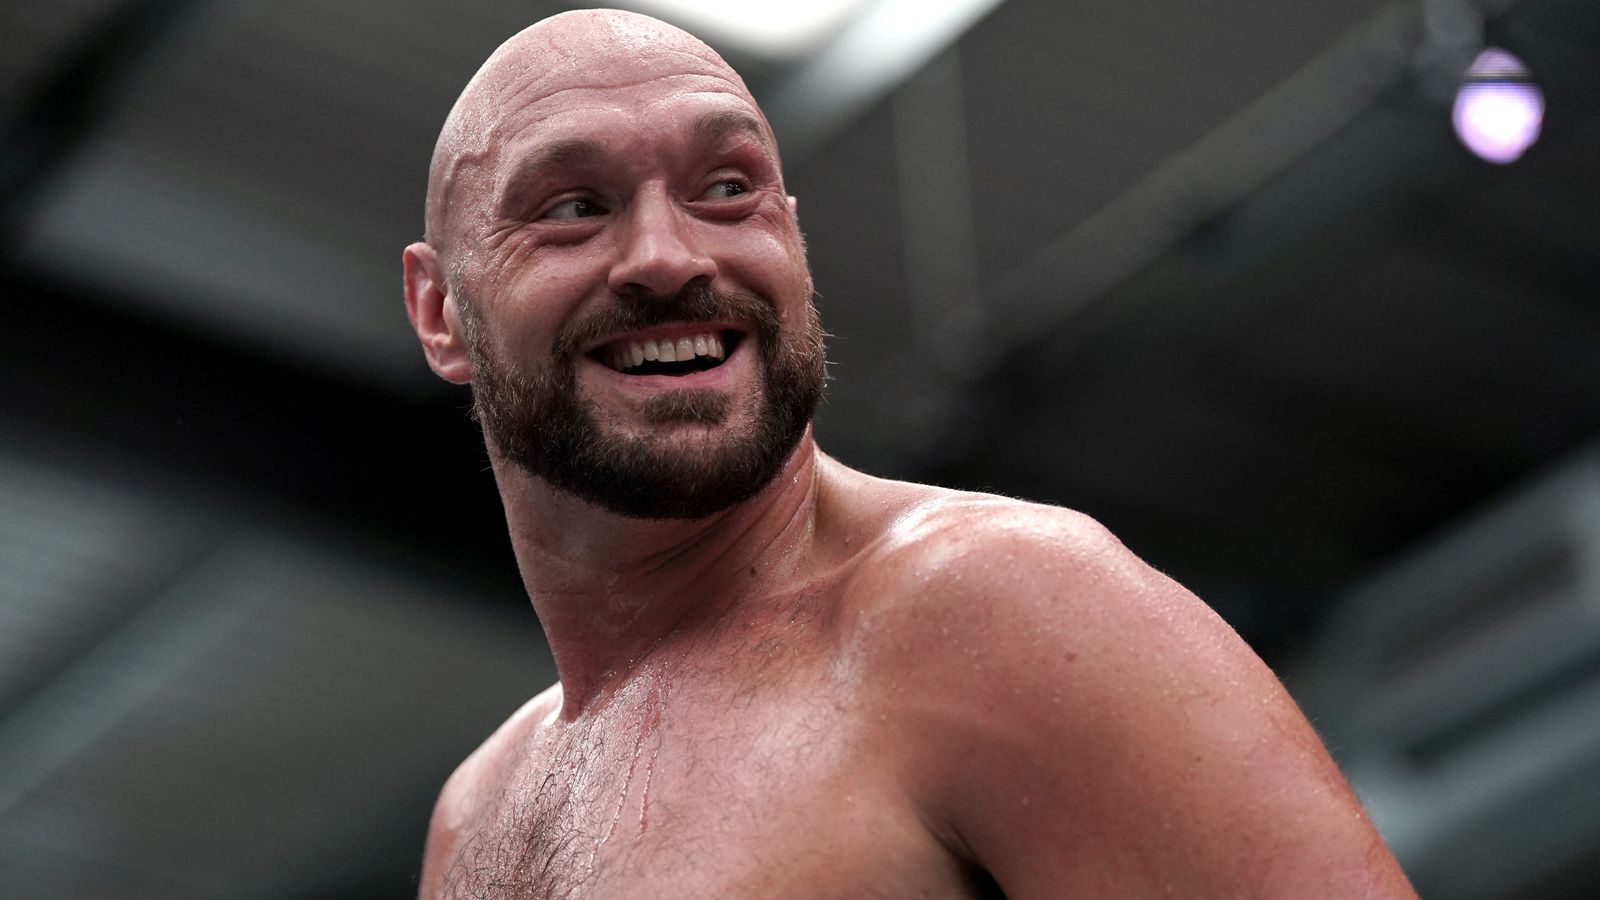 Tyson Fury 'given time' to clarify future; Deontay Wilder stays 'in contention', says WBC president Mauricio Sulaimán